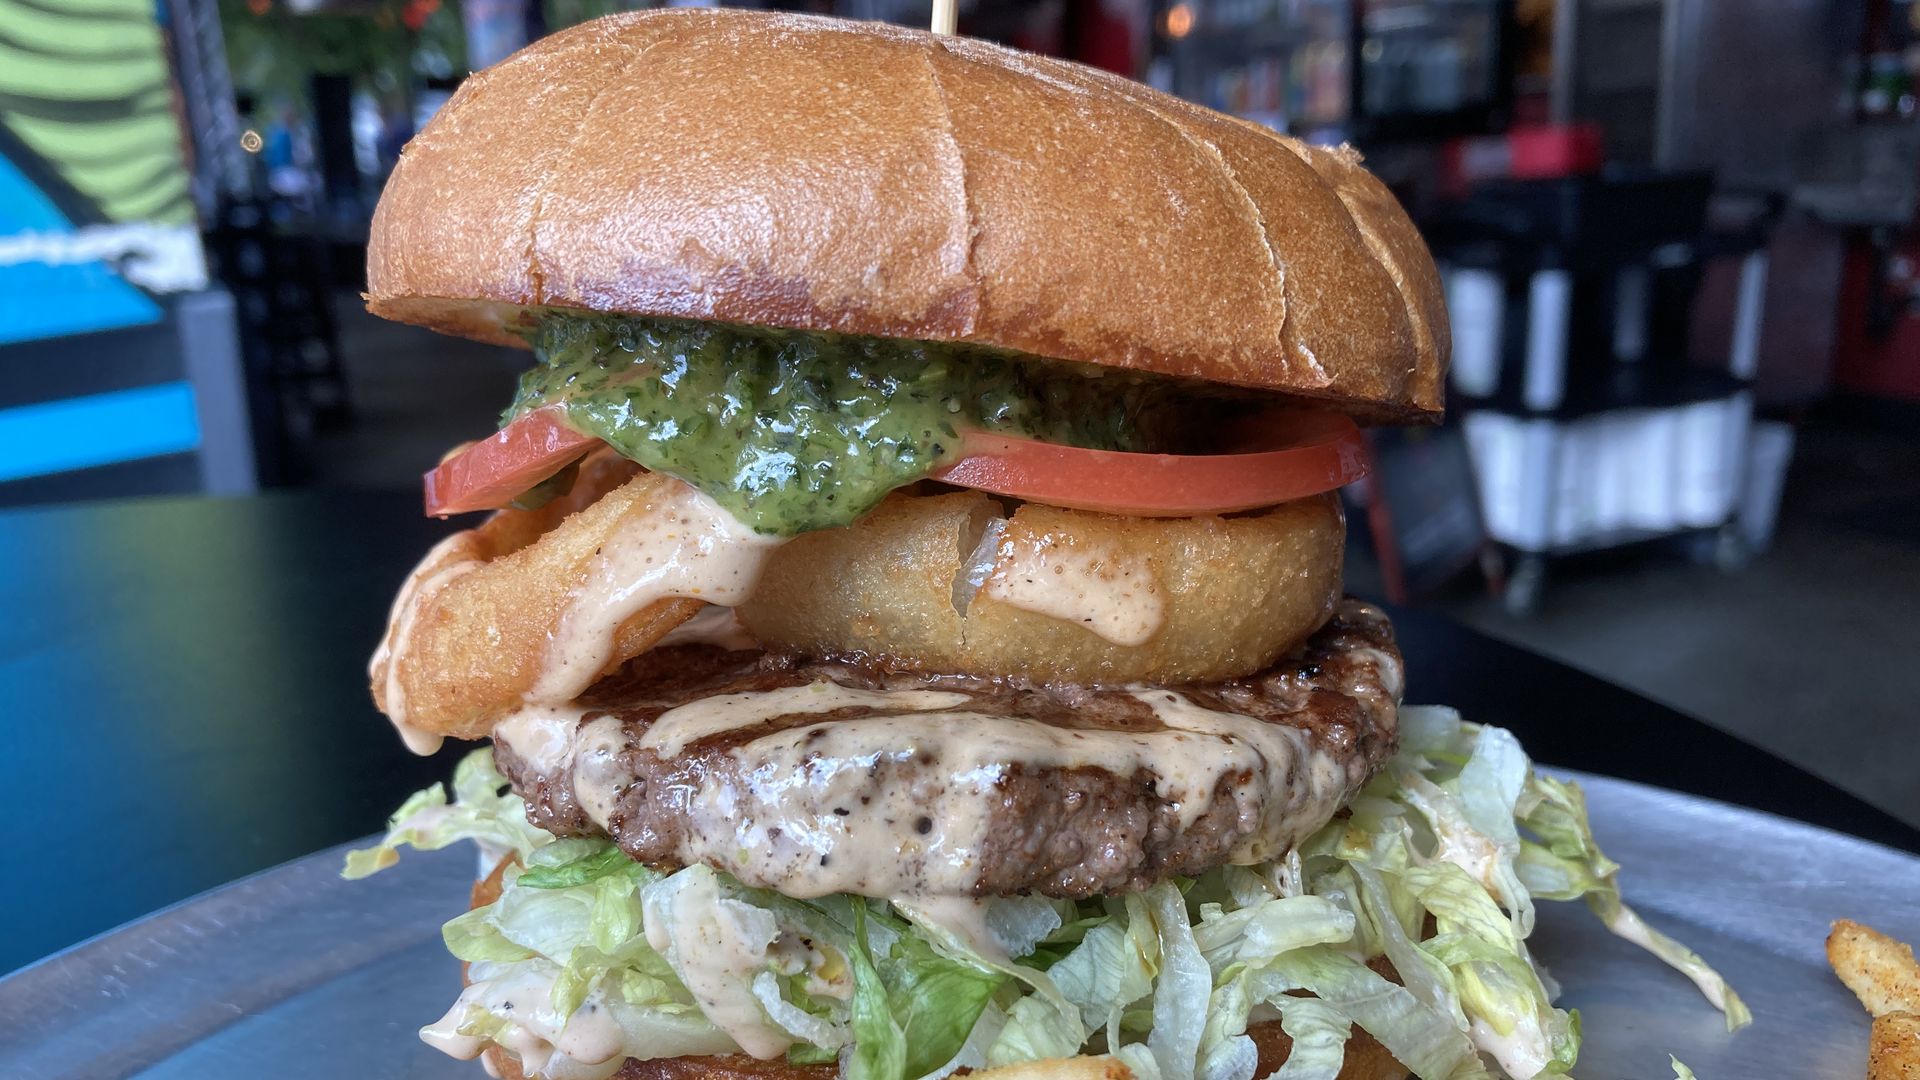 A hamburger stacked with shredded lettuce on the bottom, then a brown patty, a tan fried onion ring, a red tomato and a thick drip of green sauce falling out from under the top bun.